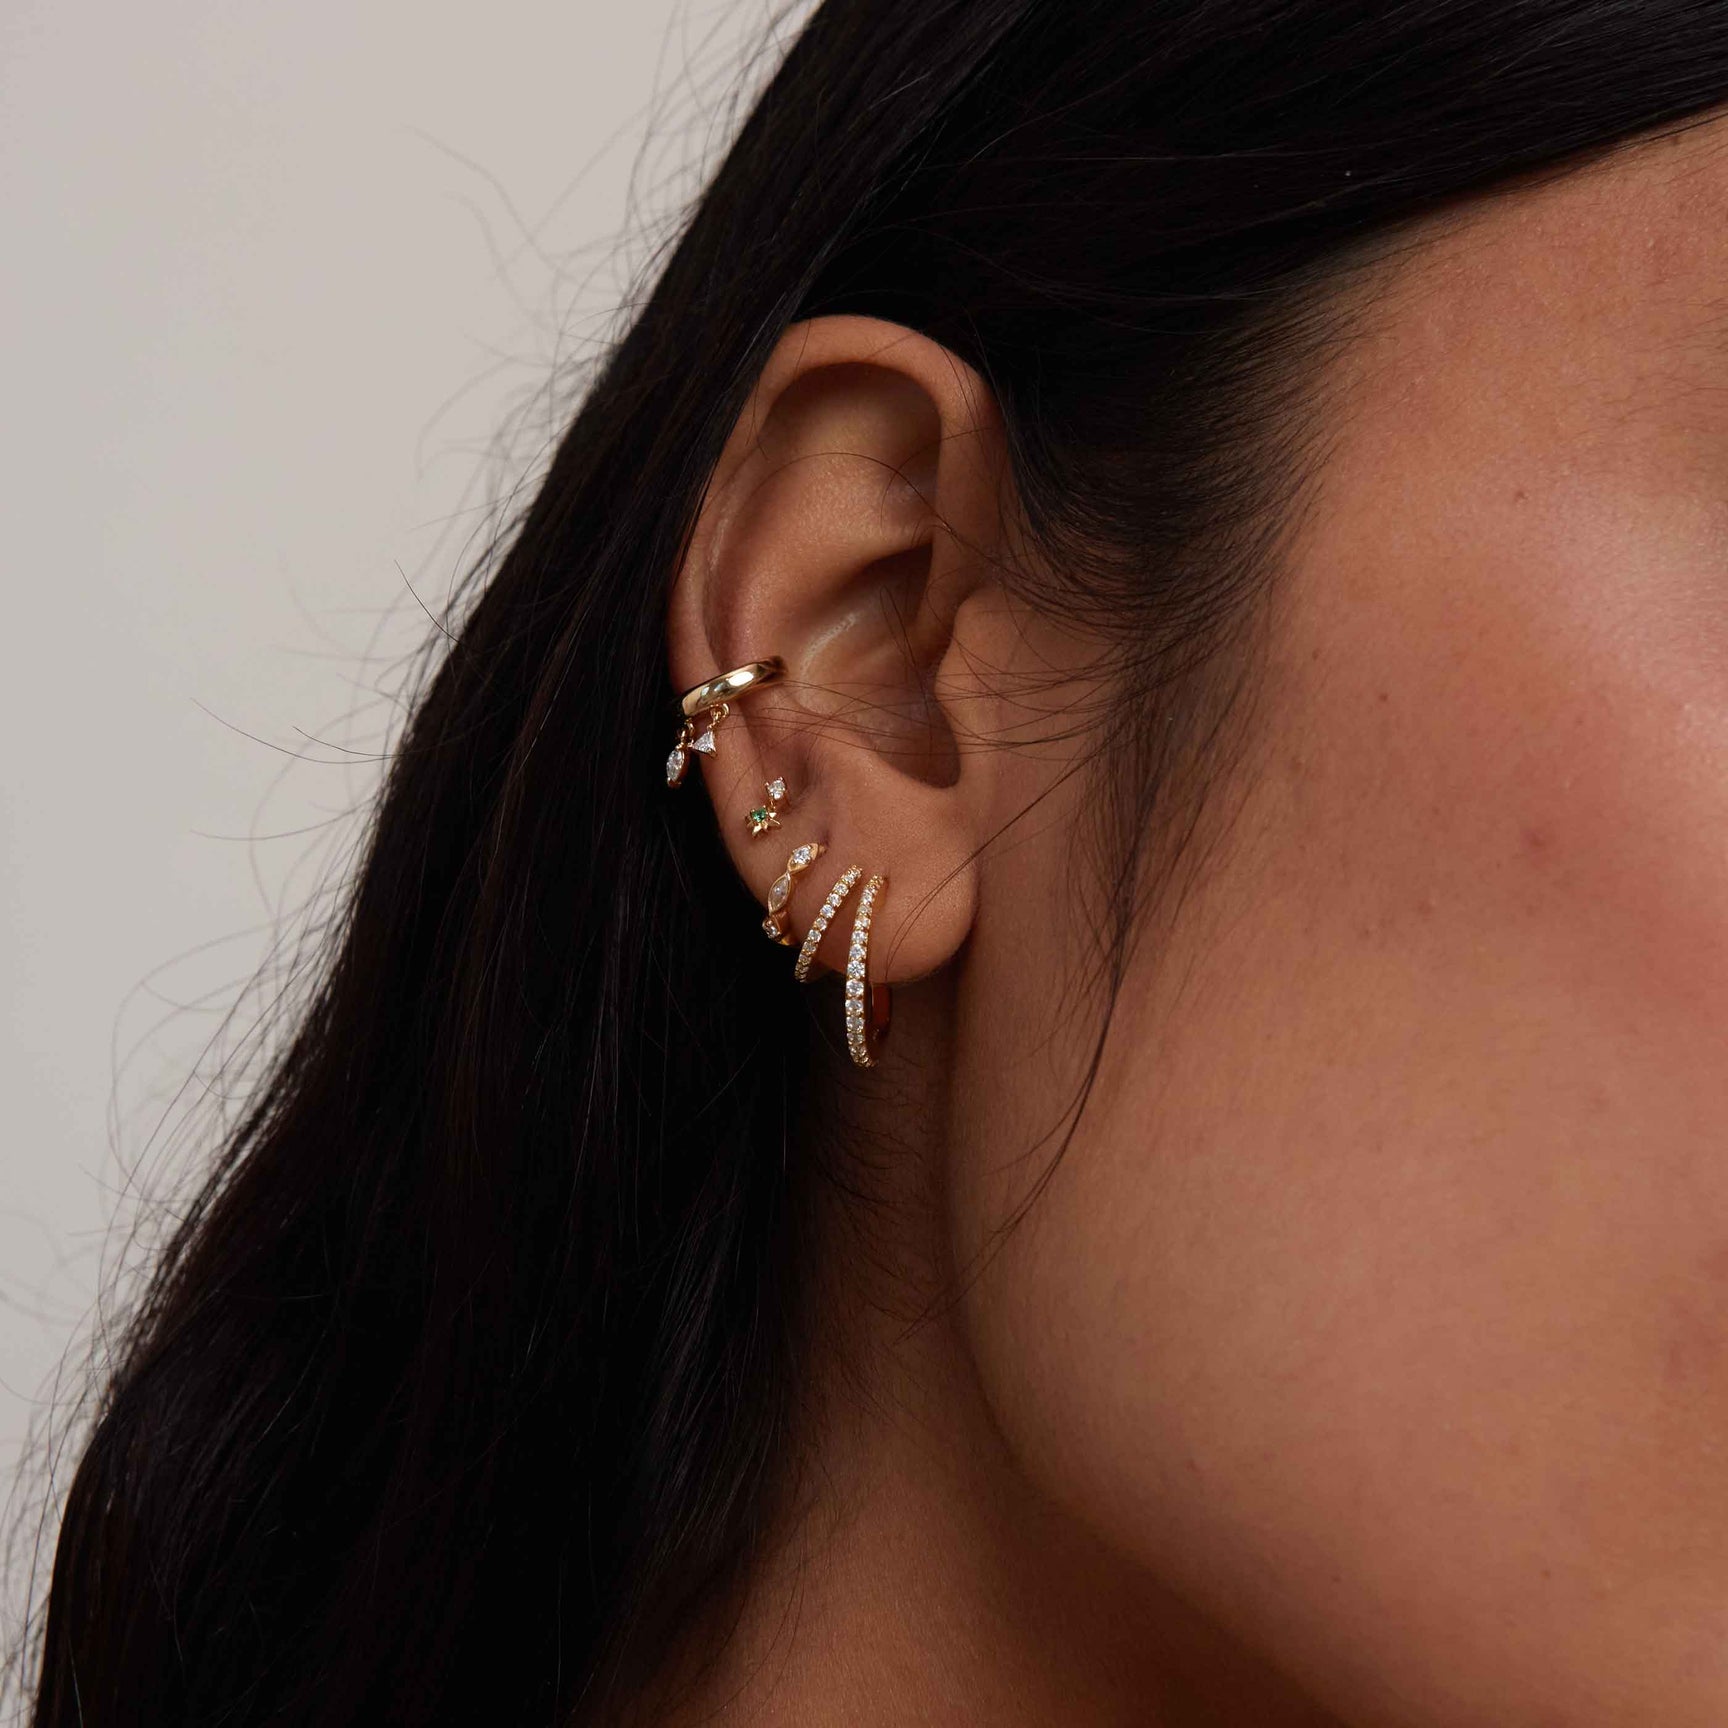 Illusion Hoops in Gold stacked with other gold earrings